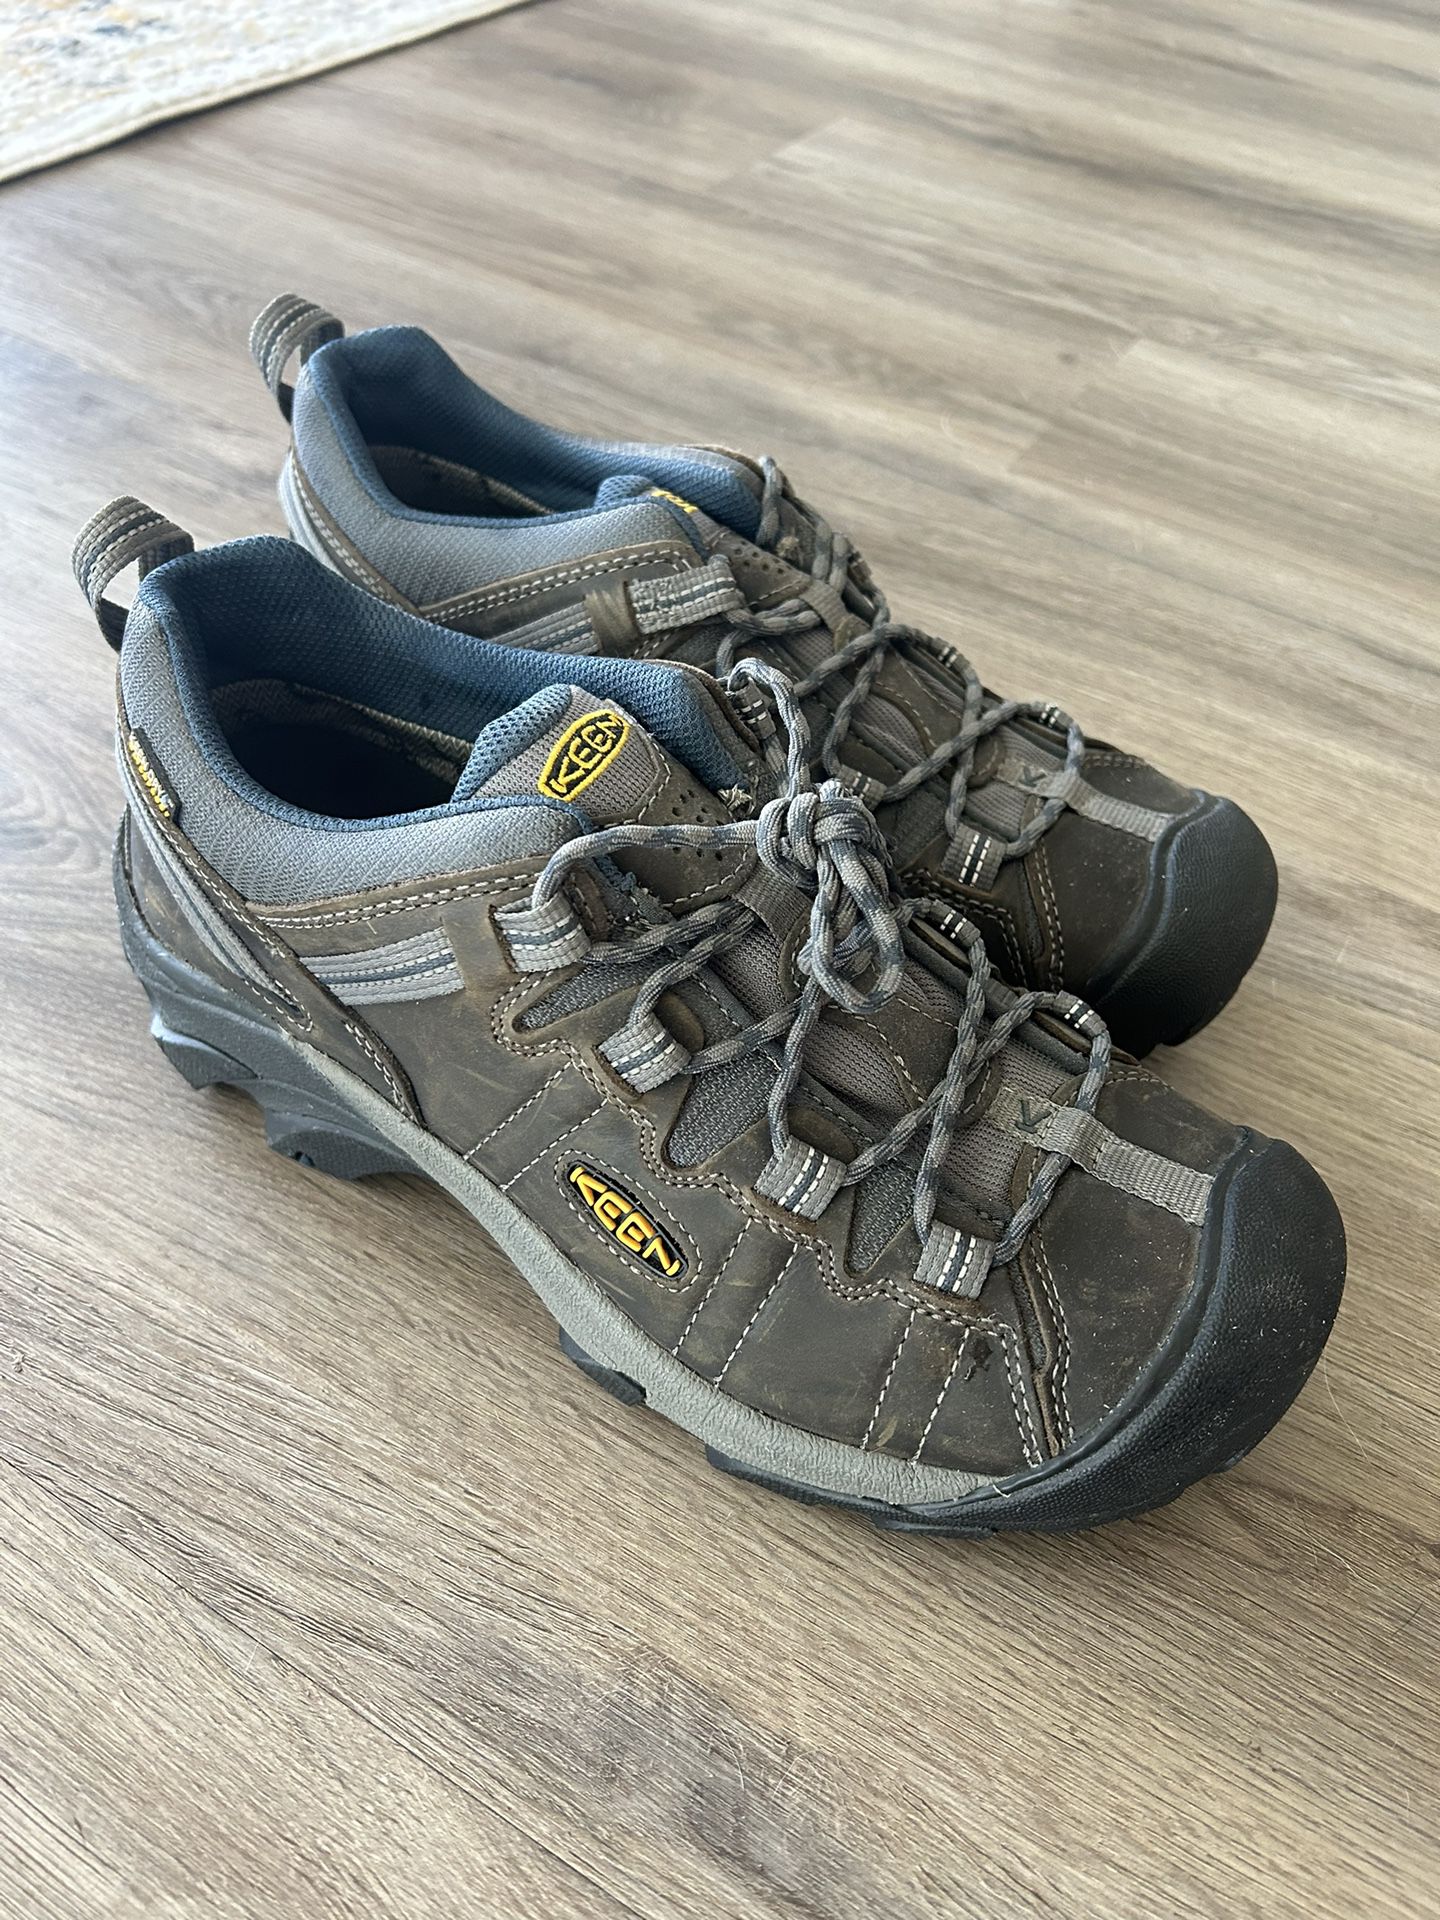 Keen Men’s Hiking Shoes Size 10 - BRAND NEW